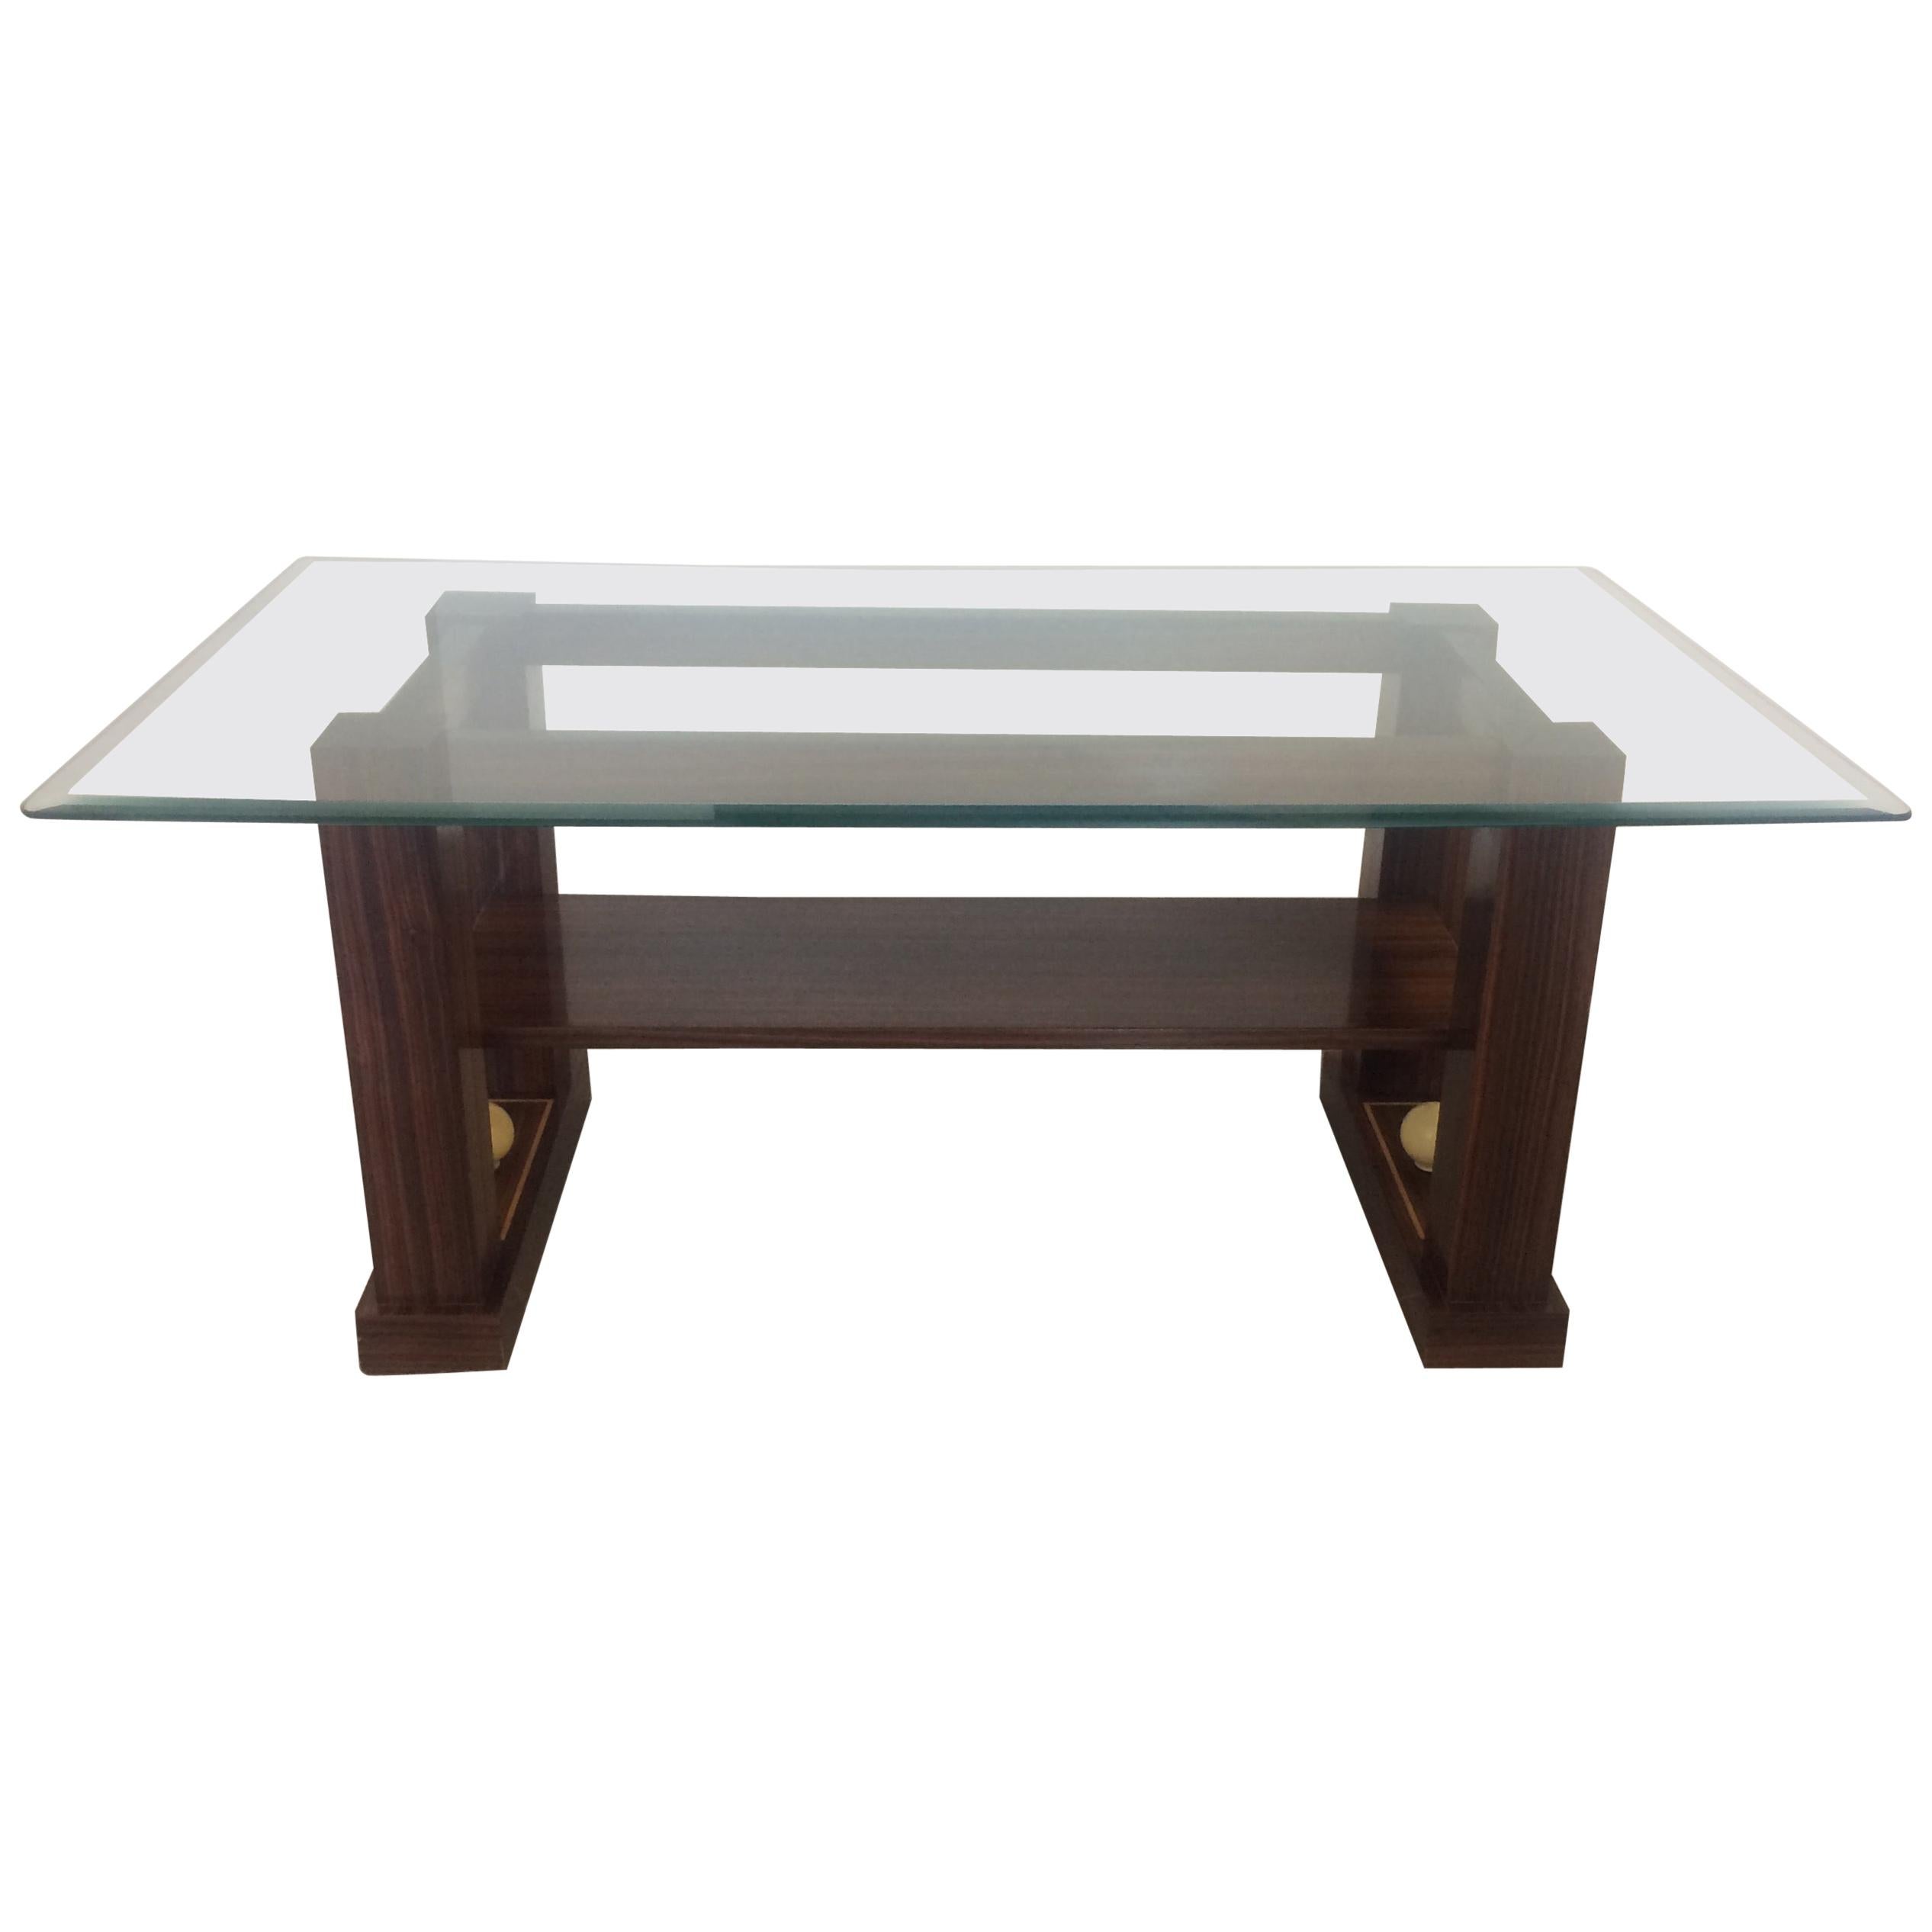 French Art Deco Style Two-Tiered Rosewood Coffee Table with Glass Top